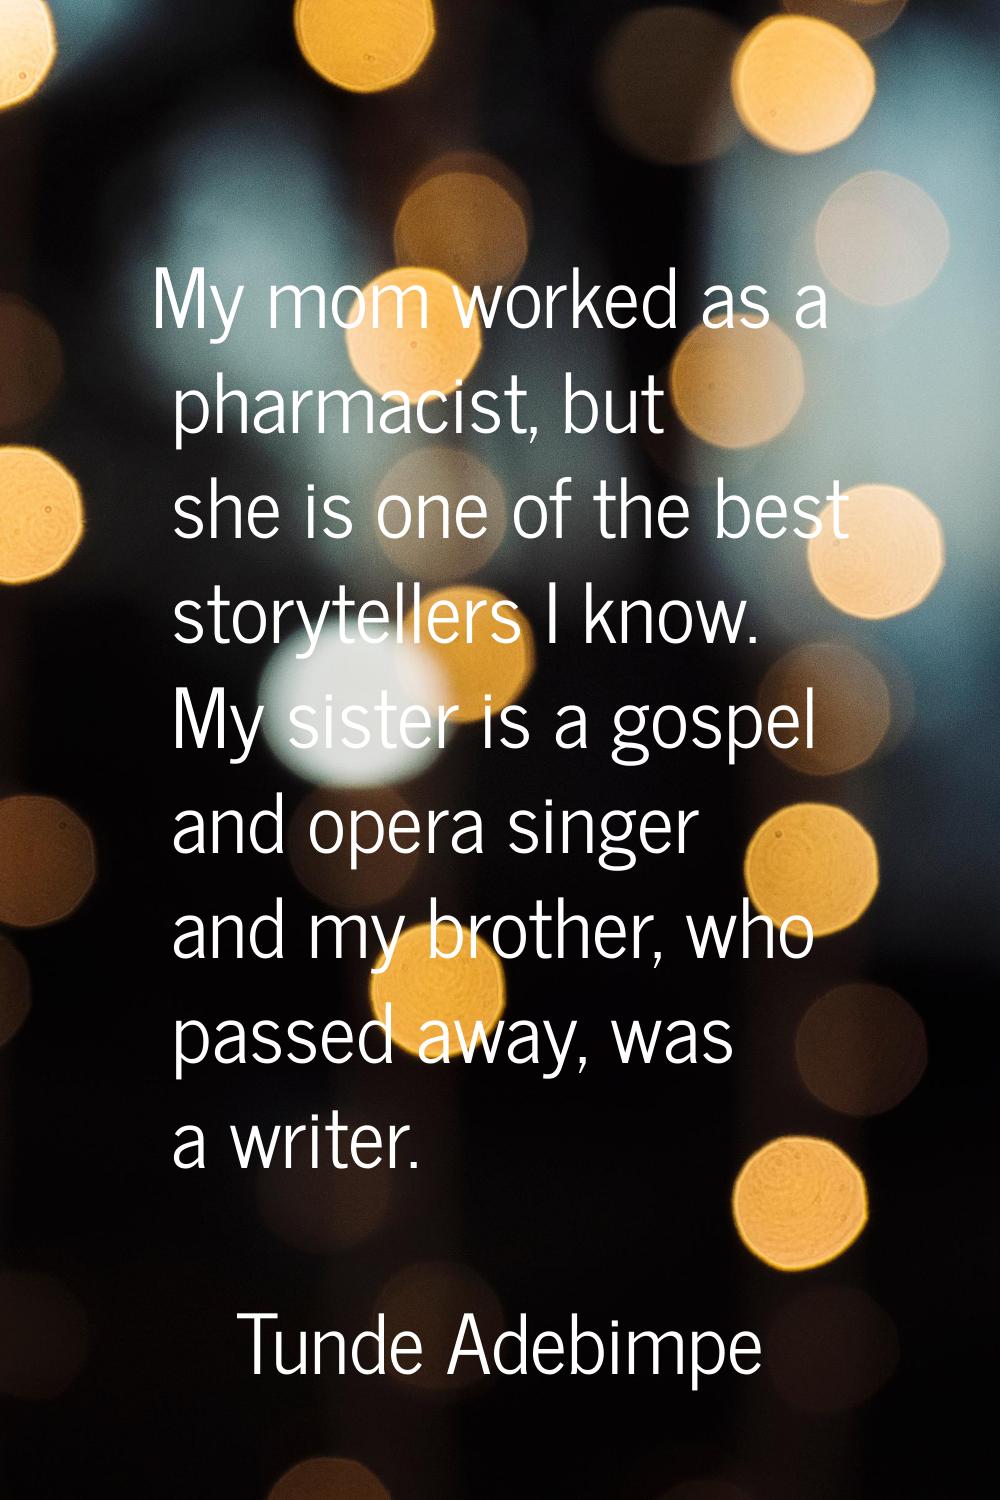 My mom worked as a pharmacist, but she is one of the best storytellers I know. My sister is a gospe